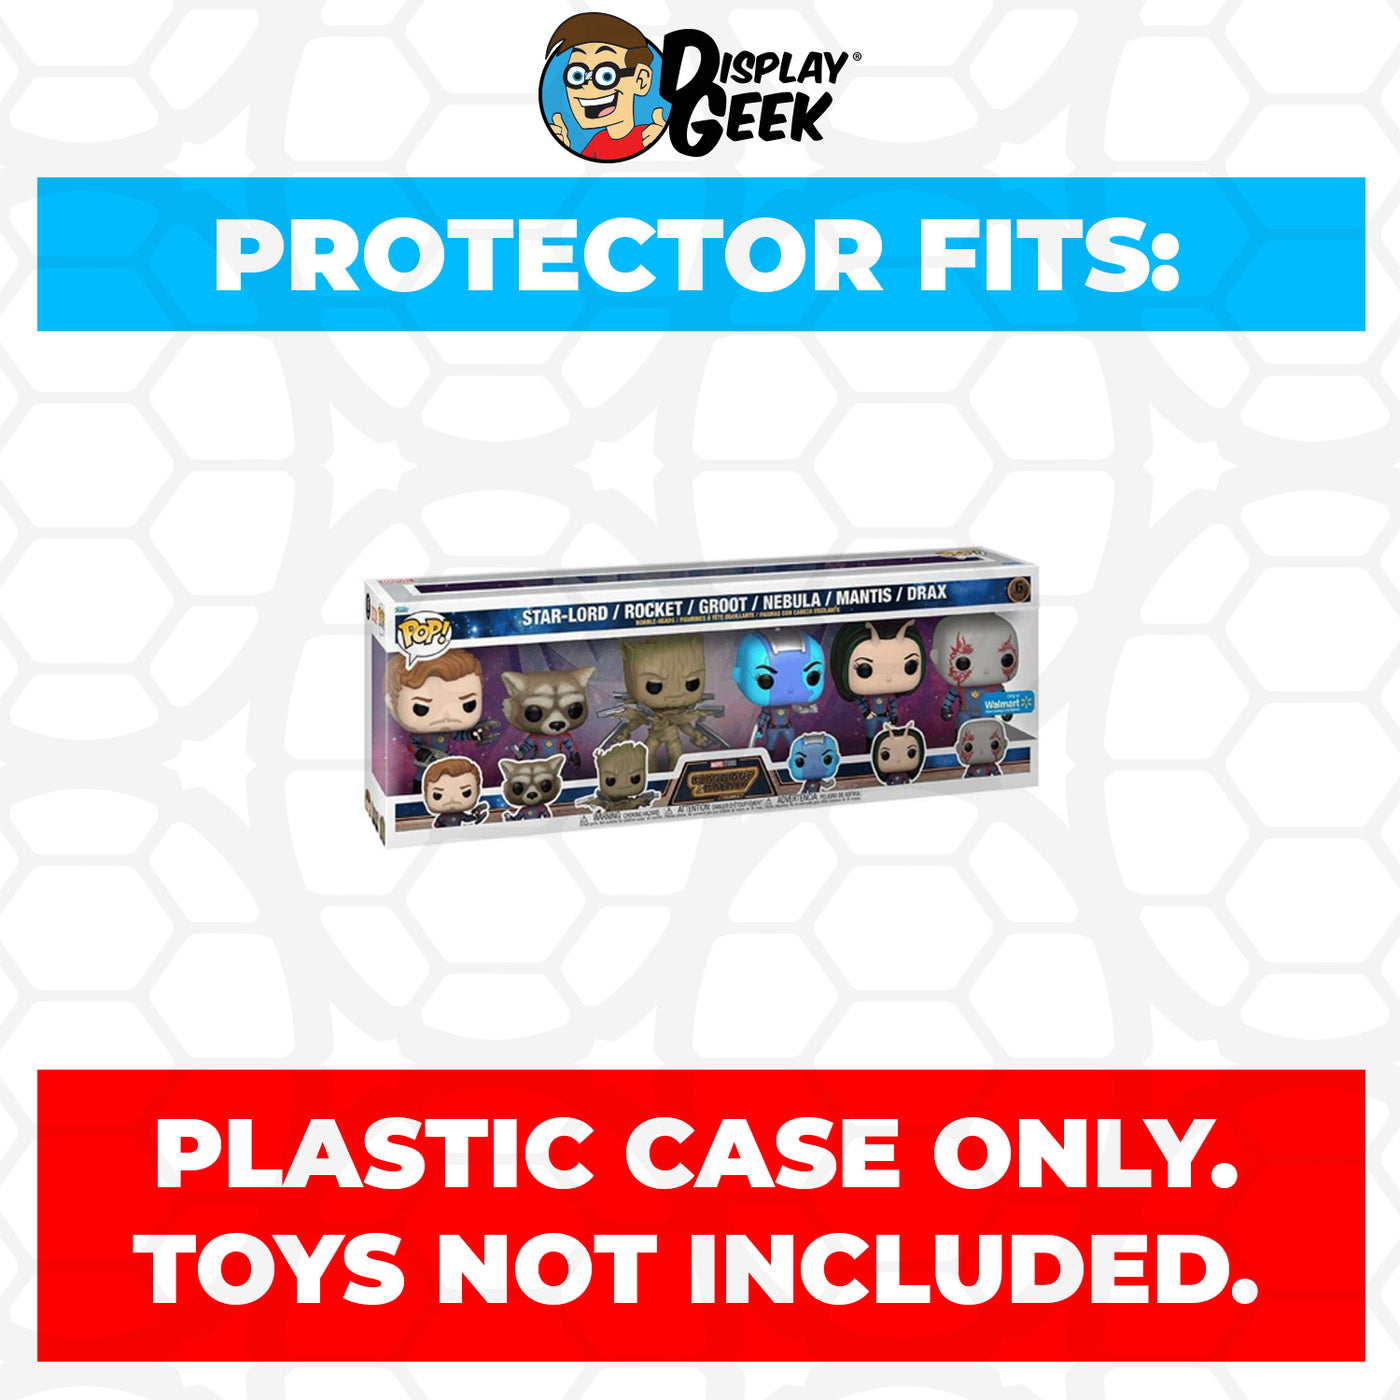 Pop Protector for 6 Pack Guardians of the Galaxy Funko Pop on The Protector Guide App by Display Geek